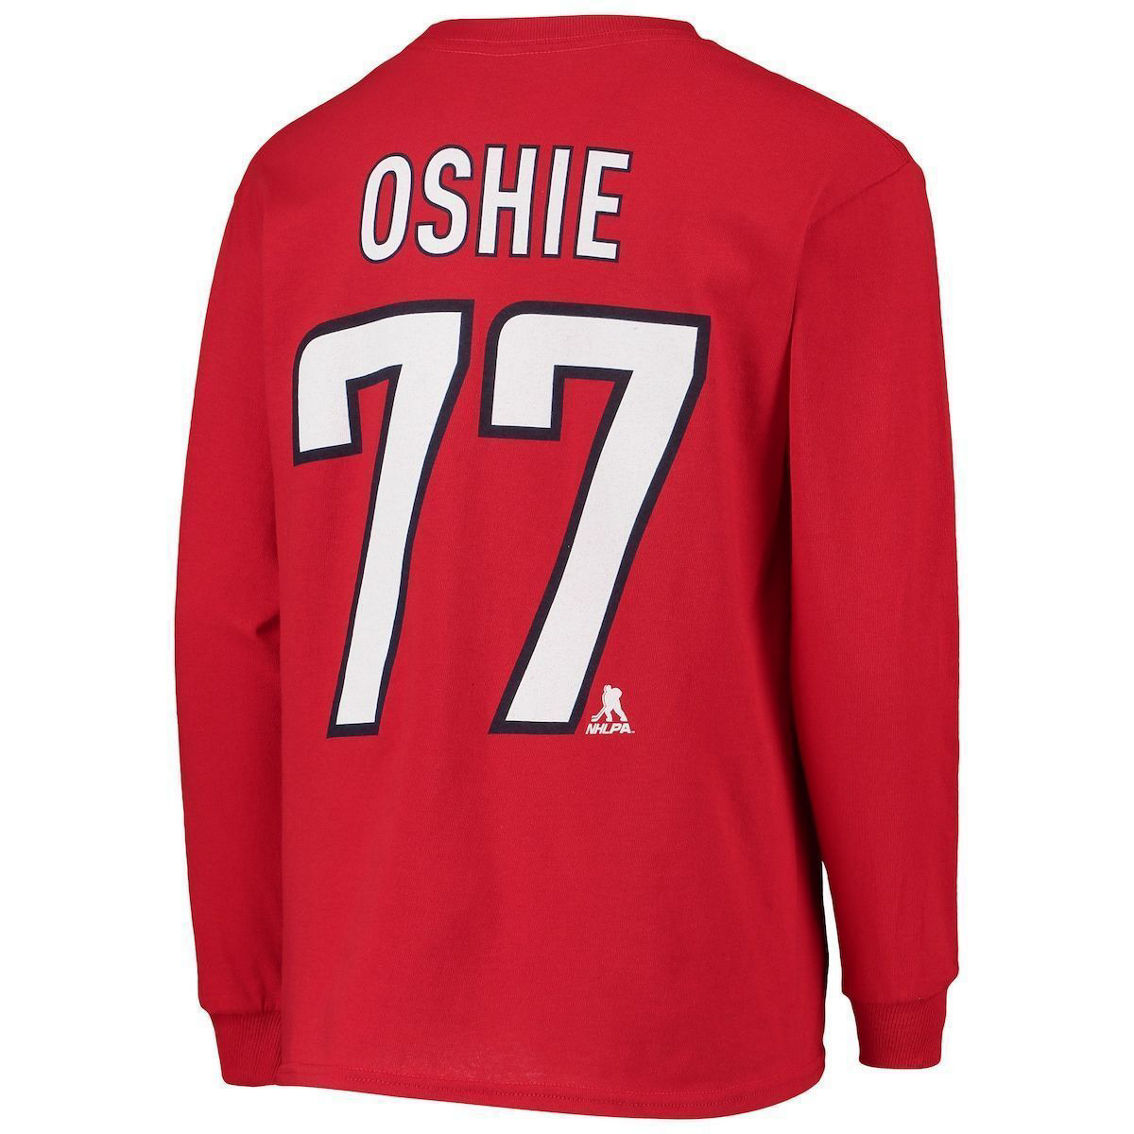 Outerstuff Youth TJ Oshie Red Washington Capitals Authentic Stack Long Sleeve Name & Number T-Shirt - Image 4 of 4